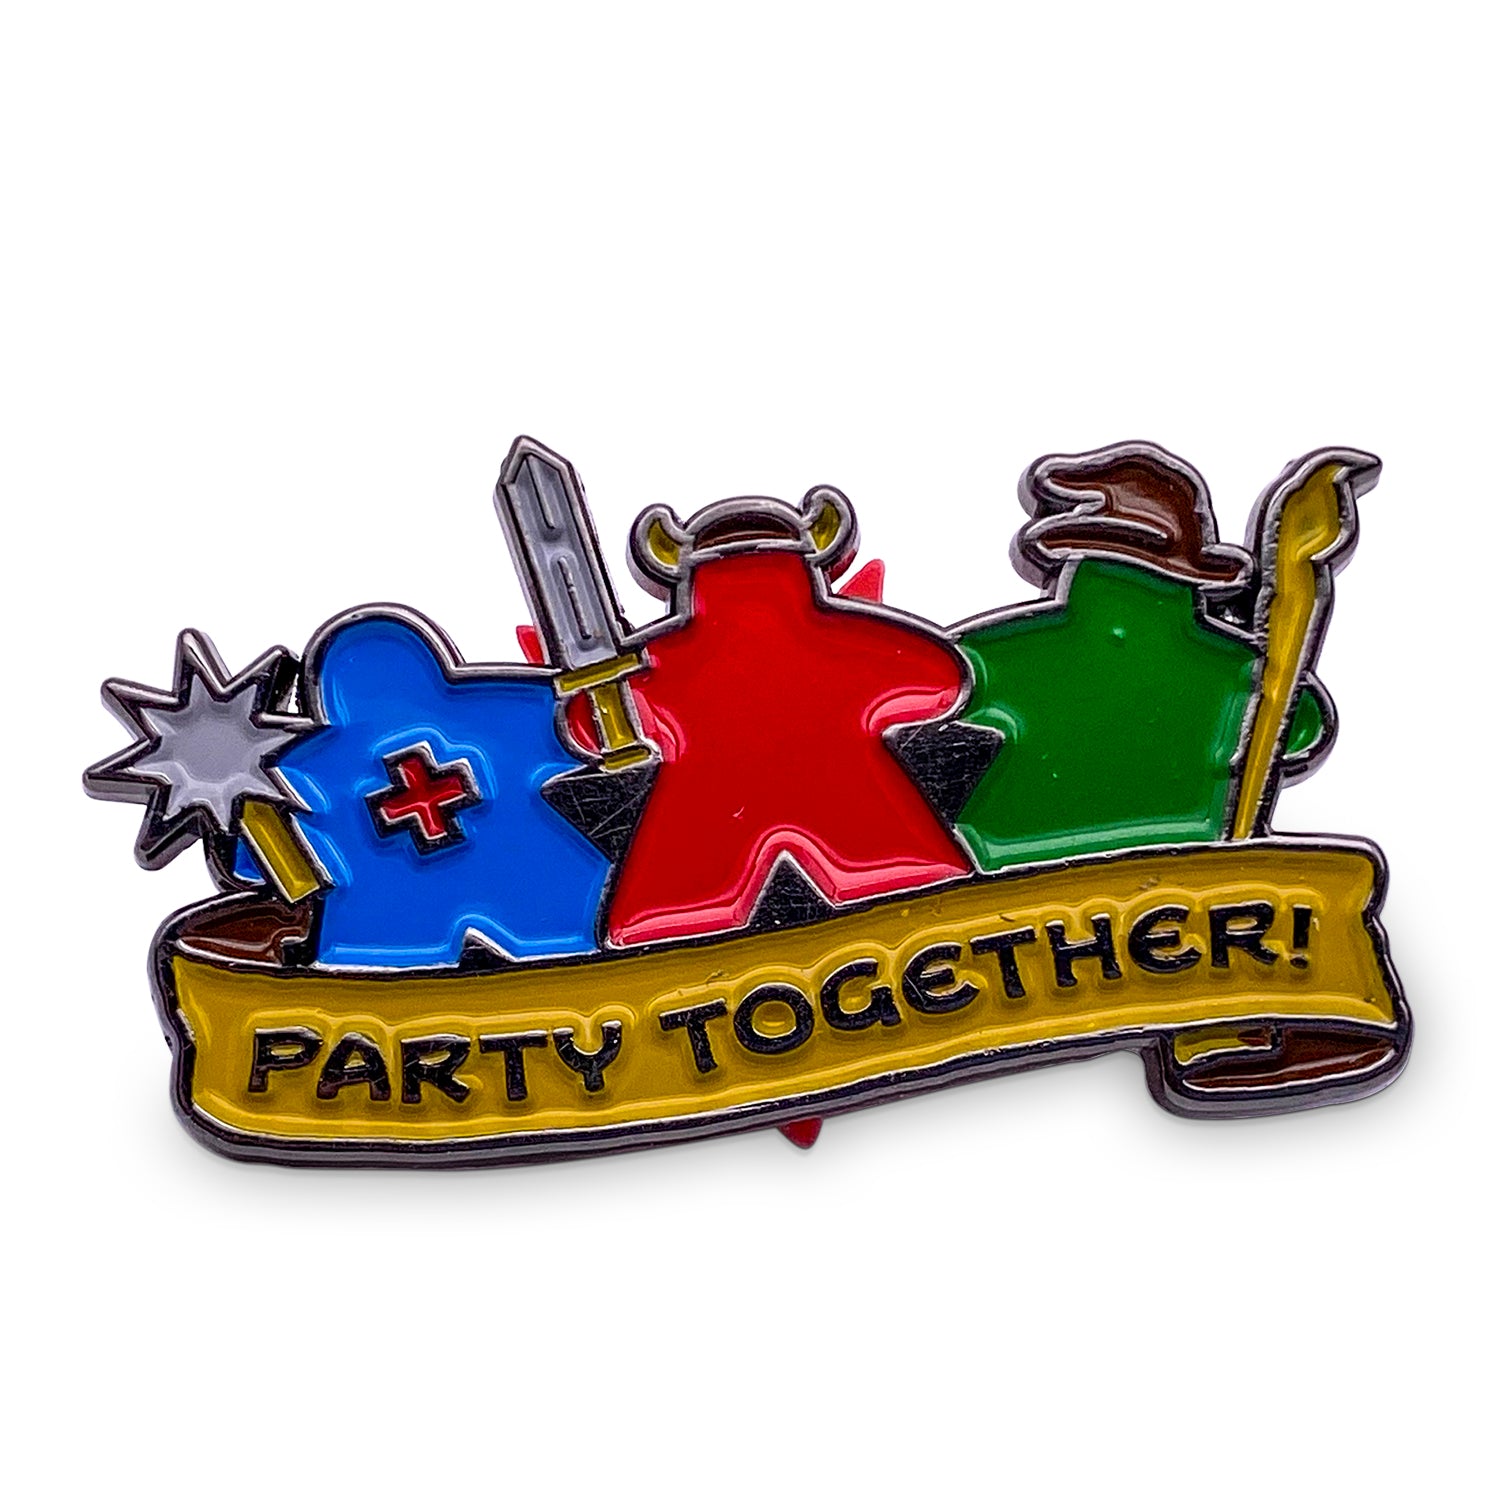 Party Together - Hard Enamel Adventure Pin Metal by Norse Foundry